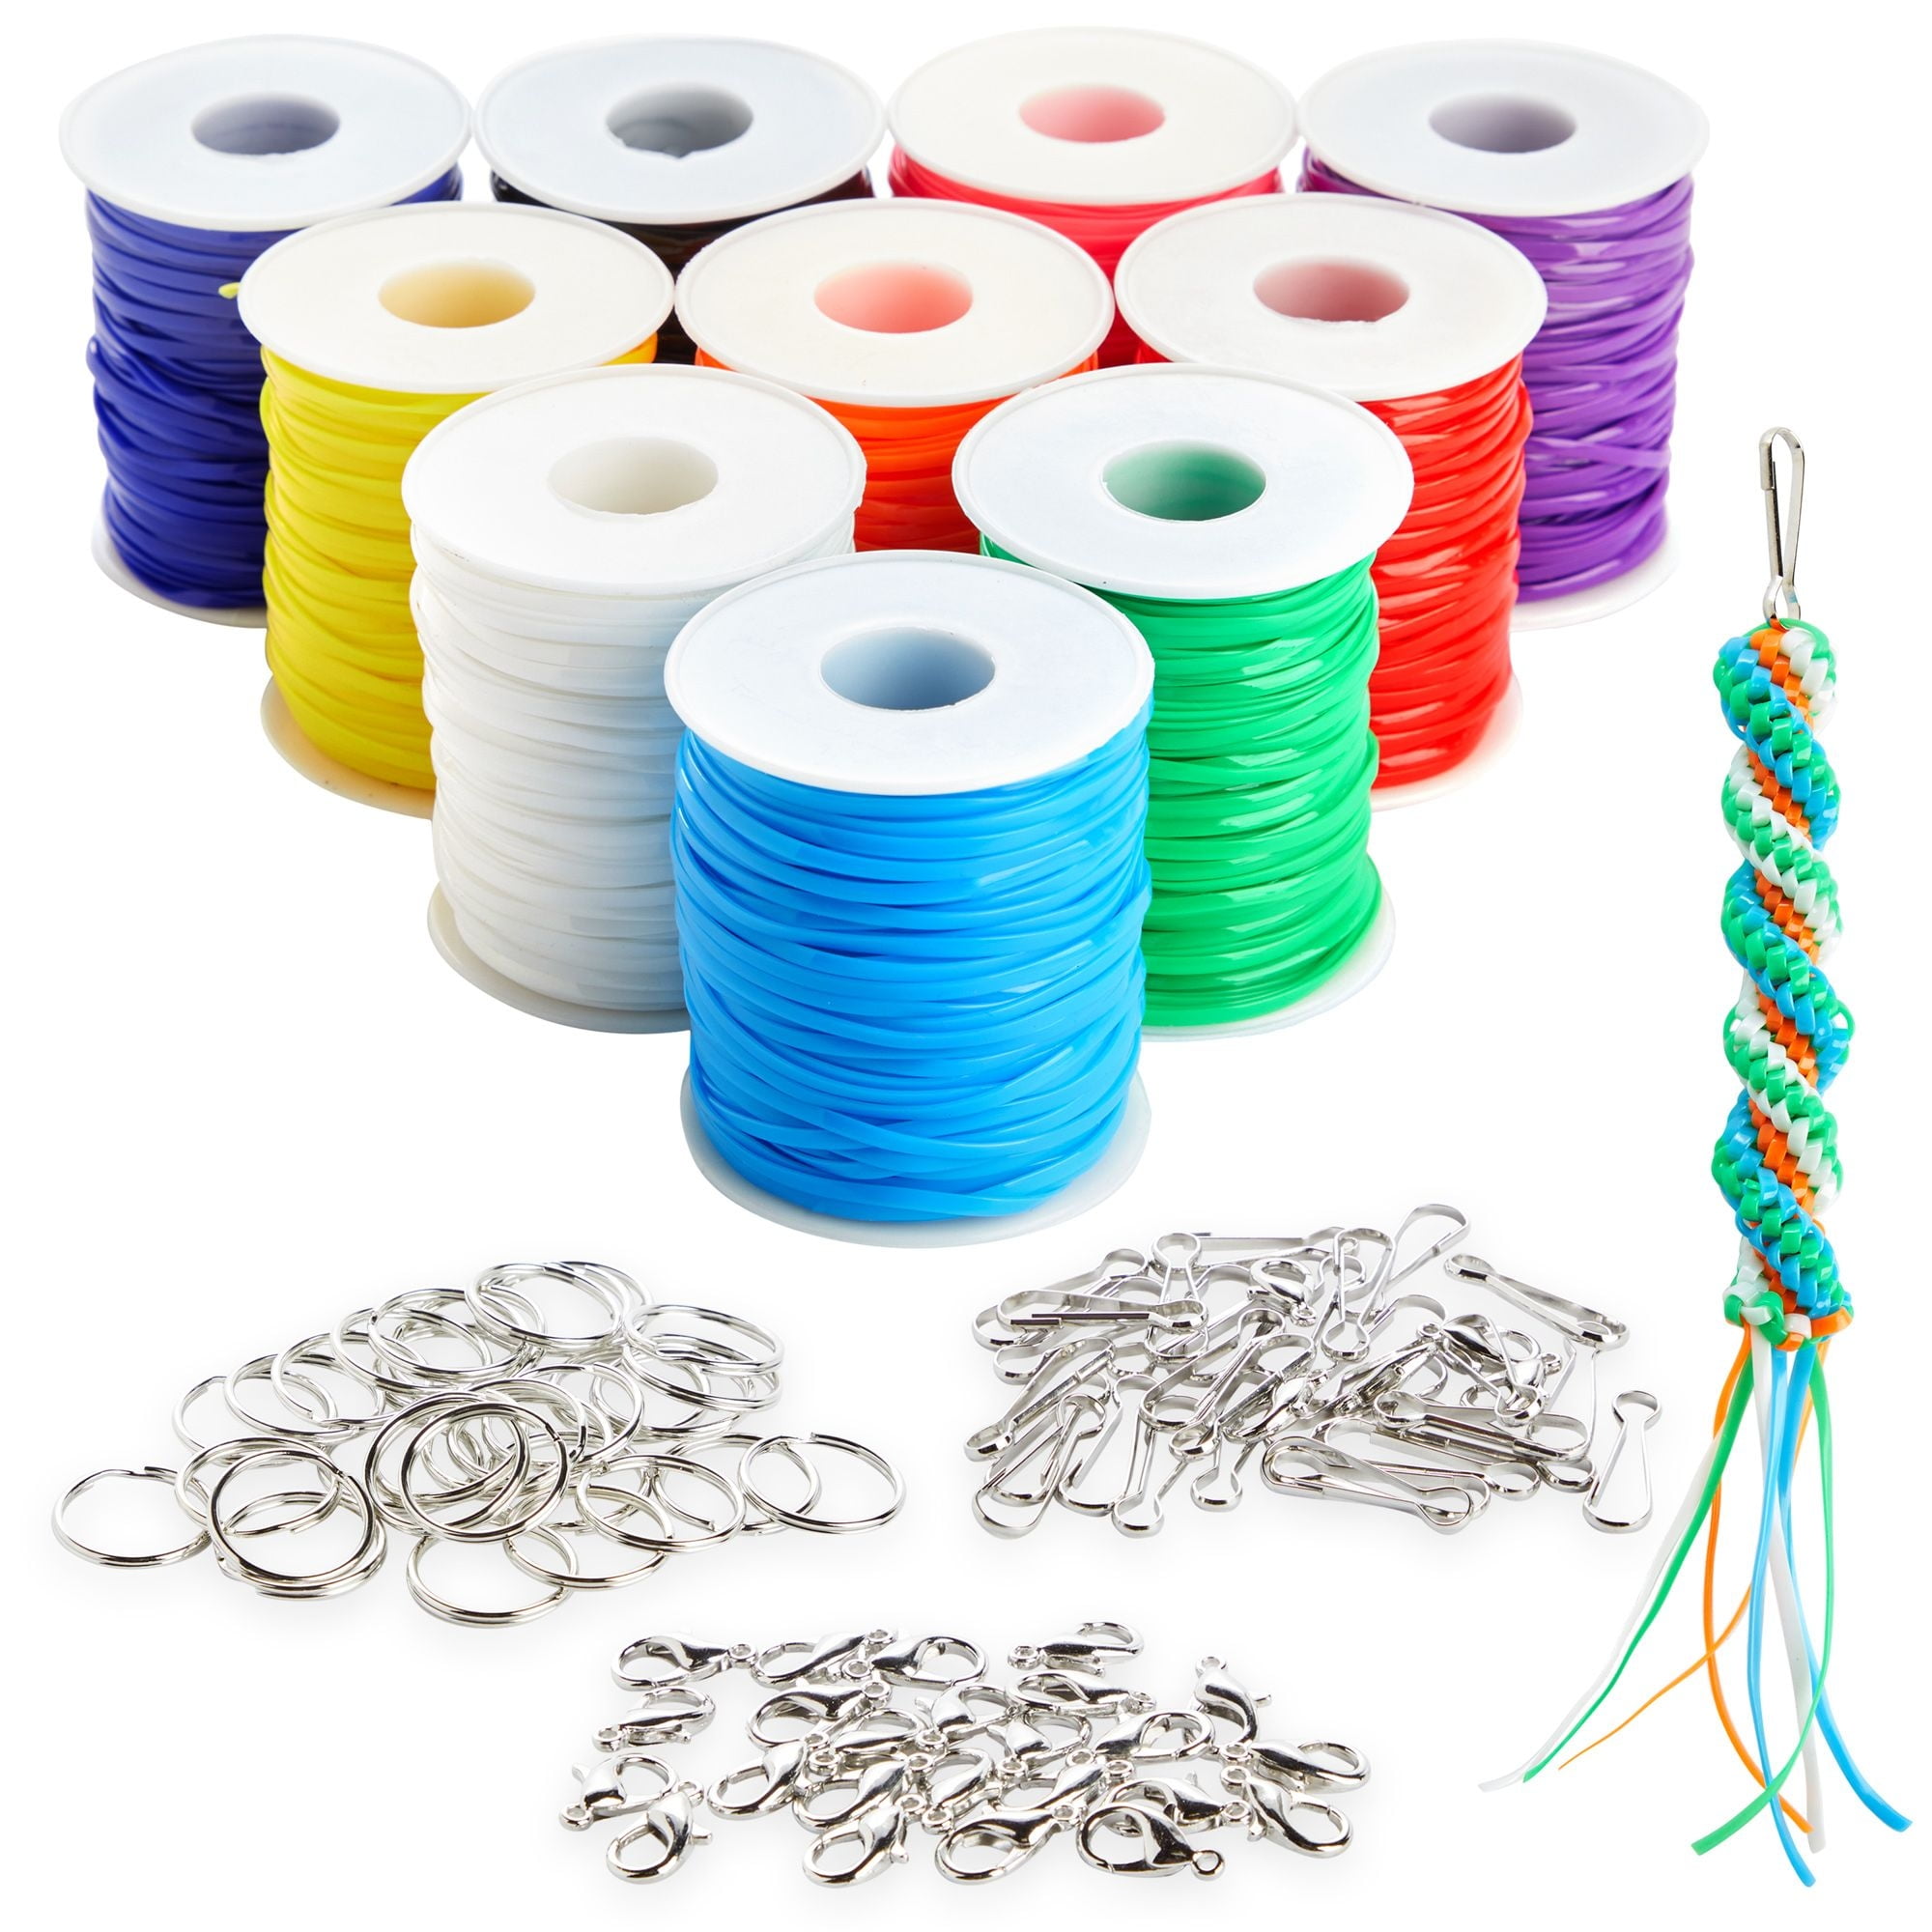 Paracord Parachute Cord Jig Bracelet Loom - Plastic Wristband Maker Paracord  Braiding Weaving Tool - DIY Craft Kit 12 Rainbow Color Cord & Buckles -  Suctions to Table 